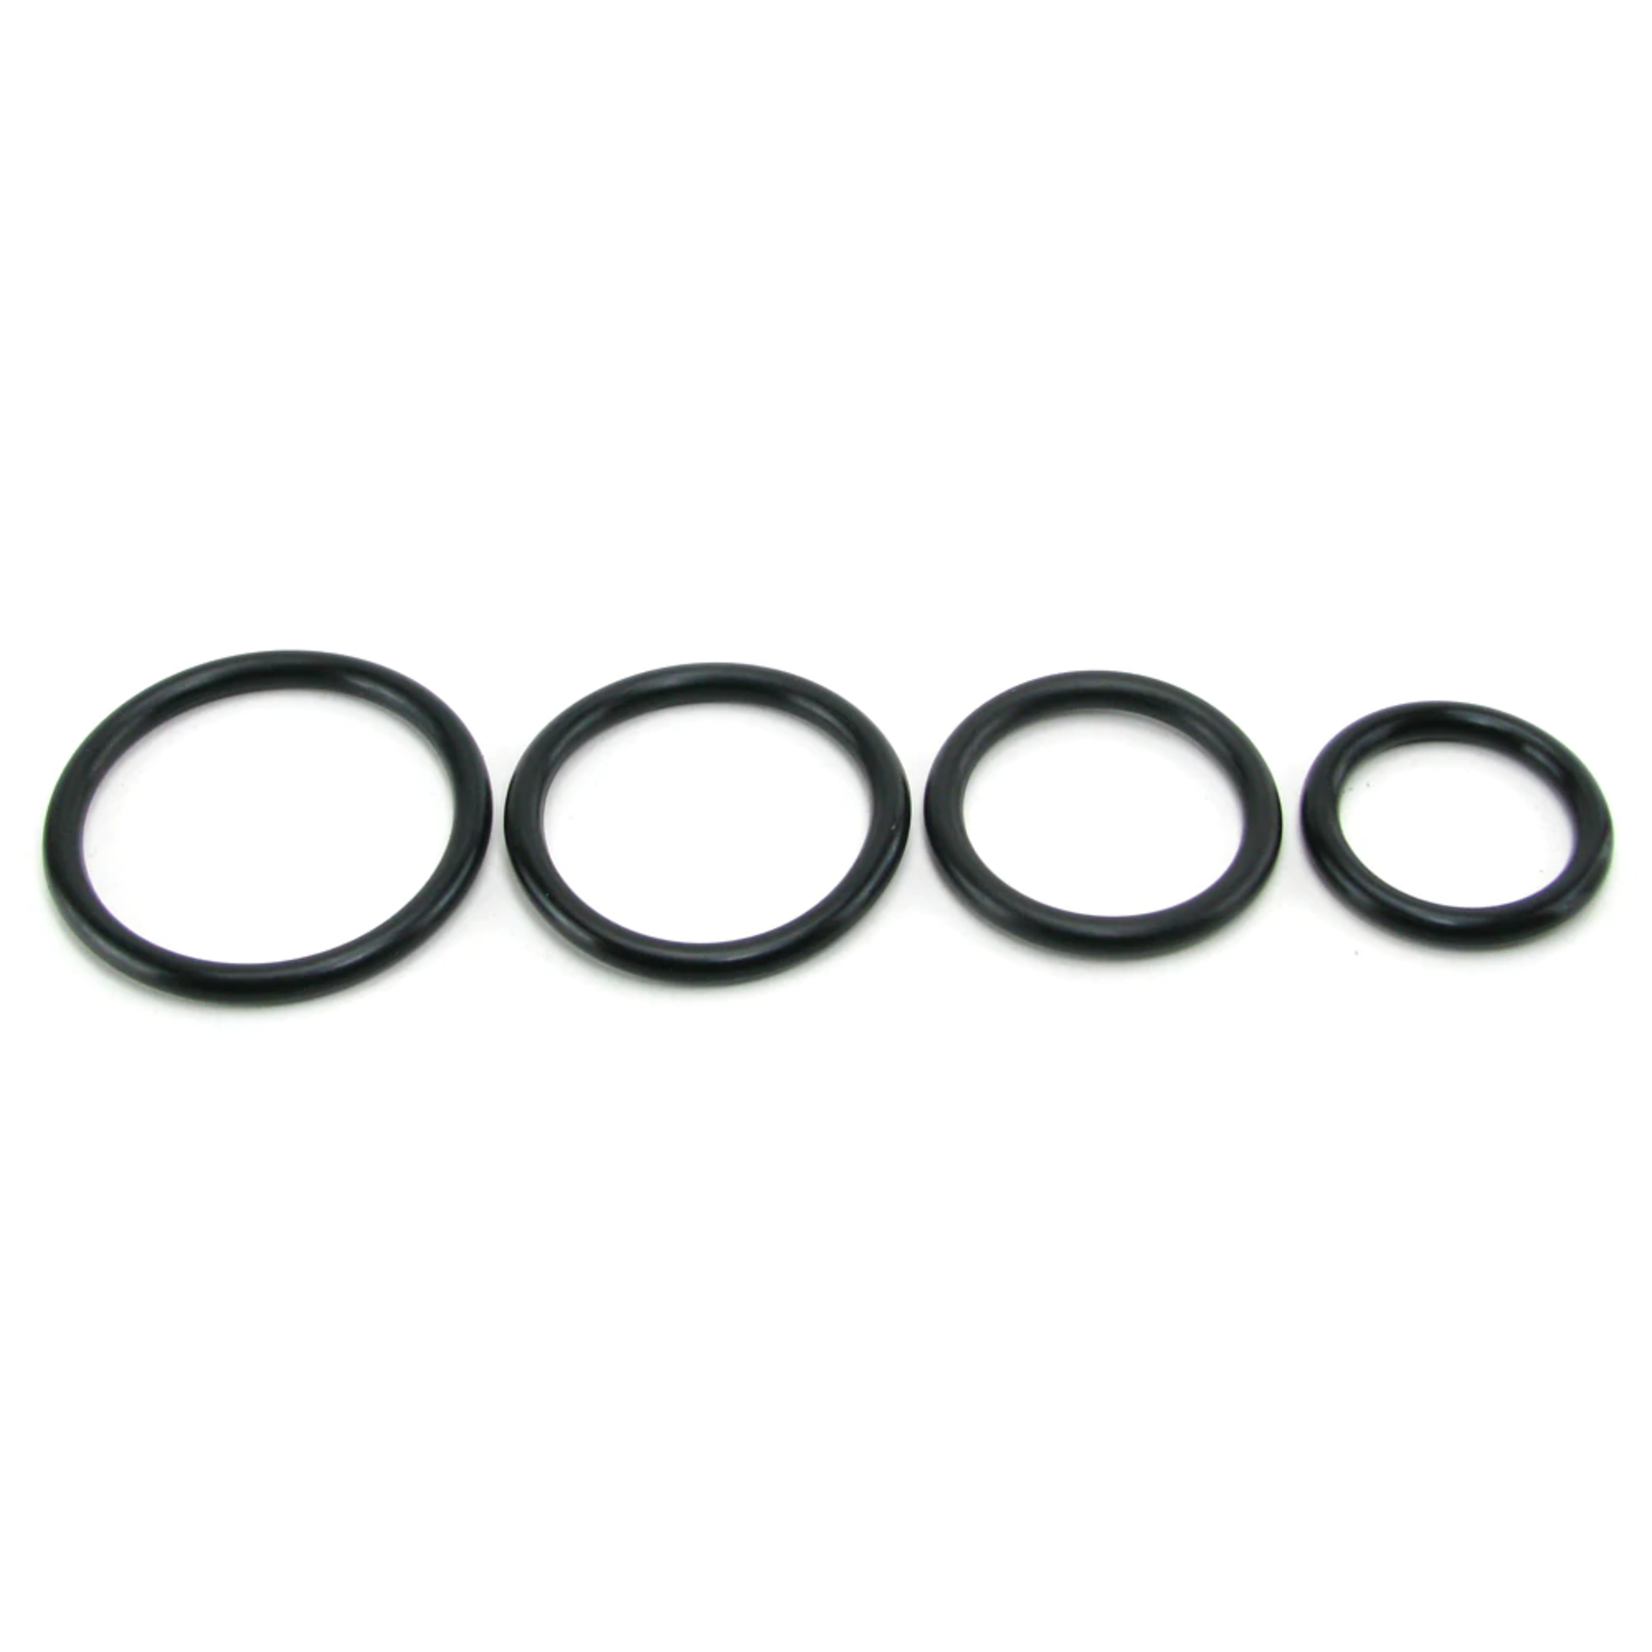 SPORTSHEETS SPORTSHEETS - RUBBER O-RING 4 PACK